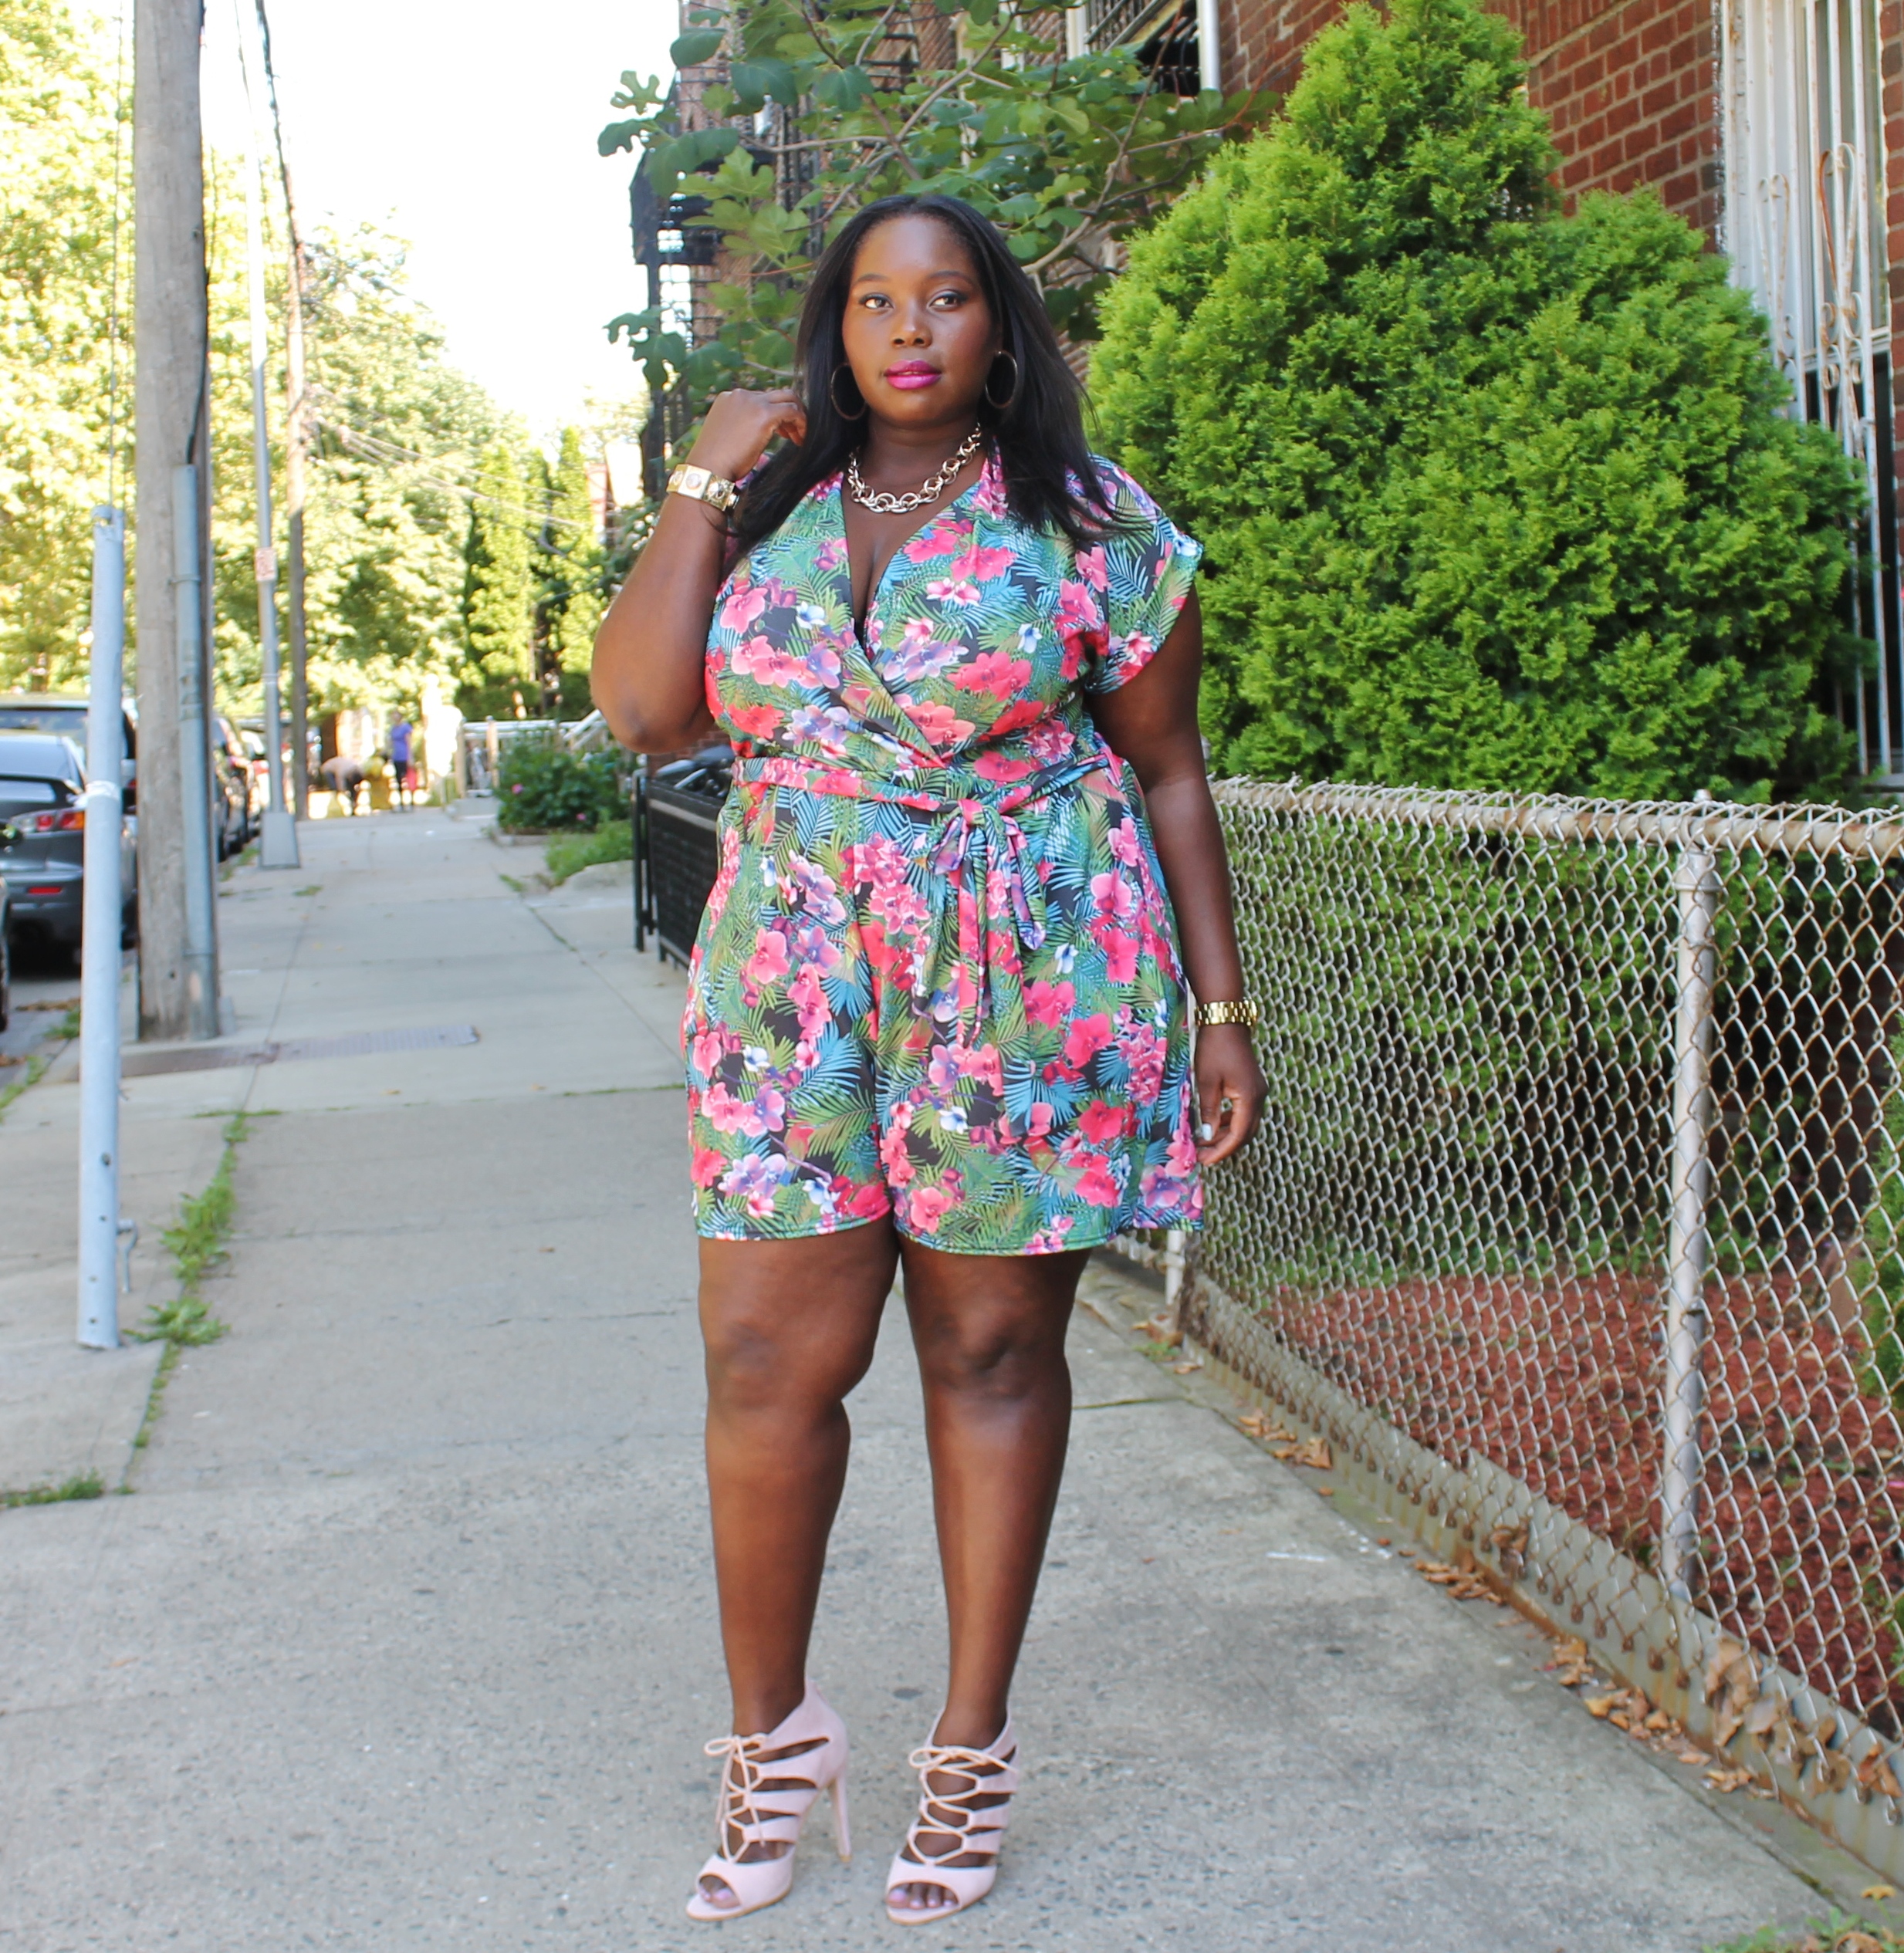 STYLE NEW LOOK'S PLUS SIZE ROMPER IS A SUMMER ESSENTIAL - Stylish Curves